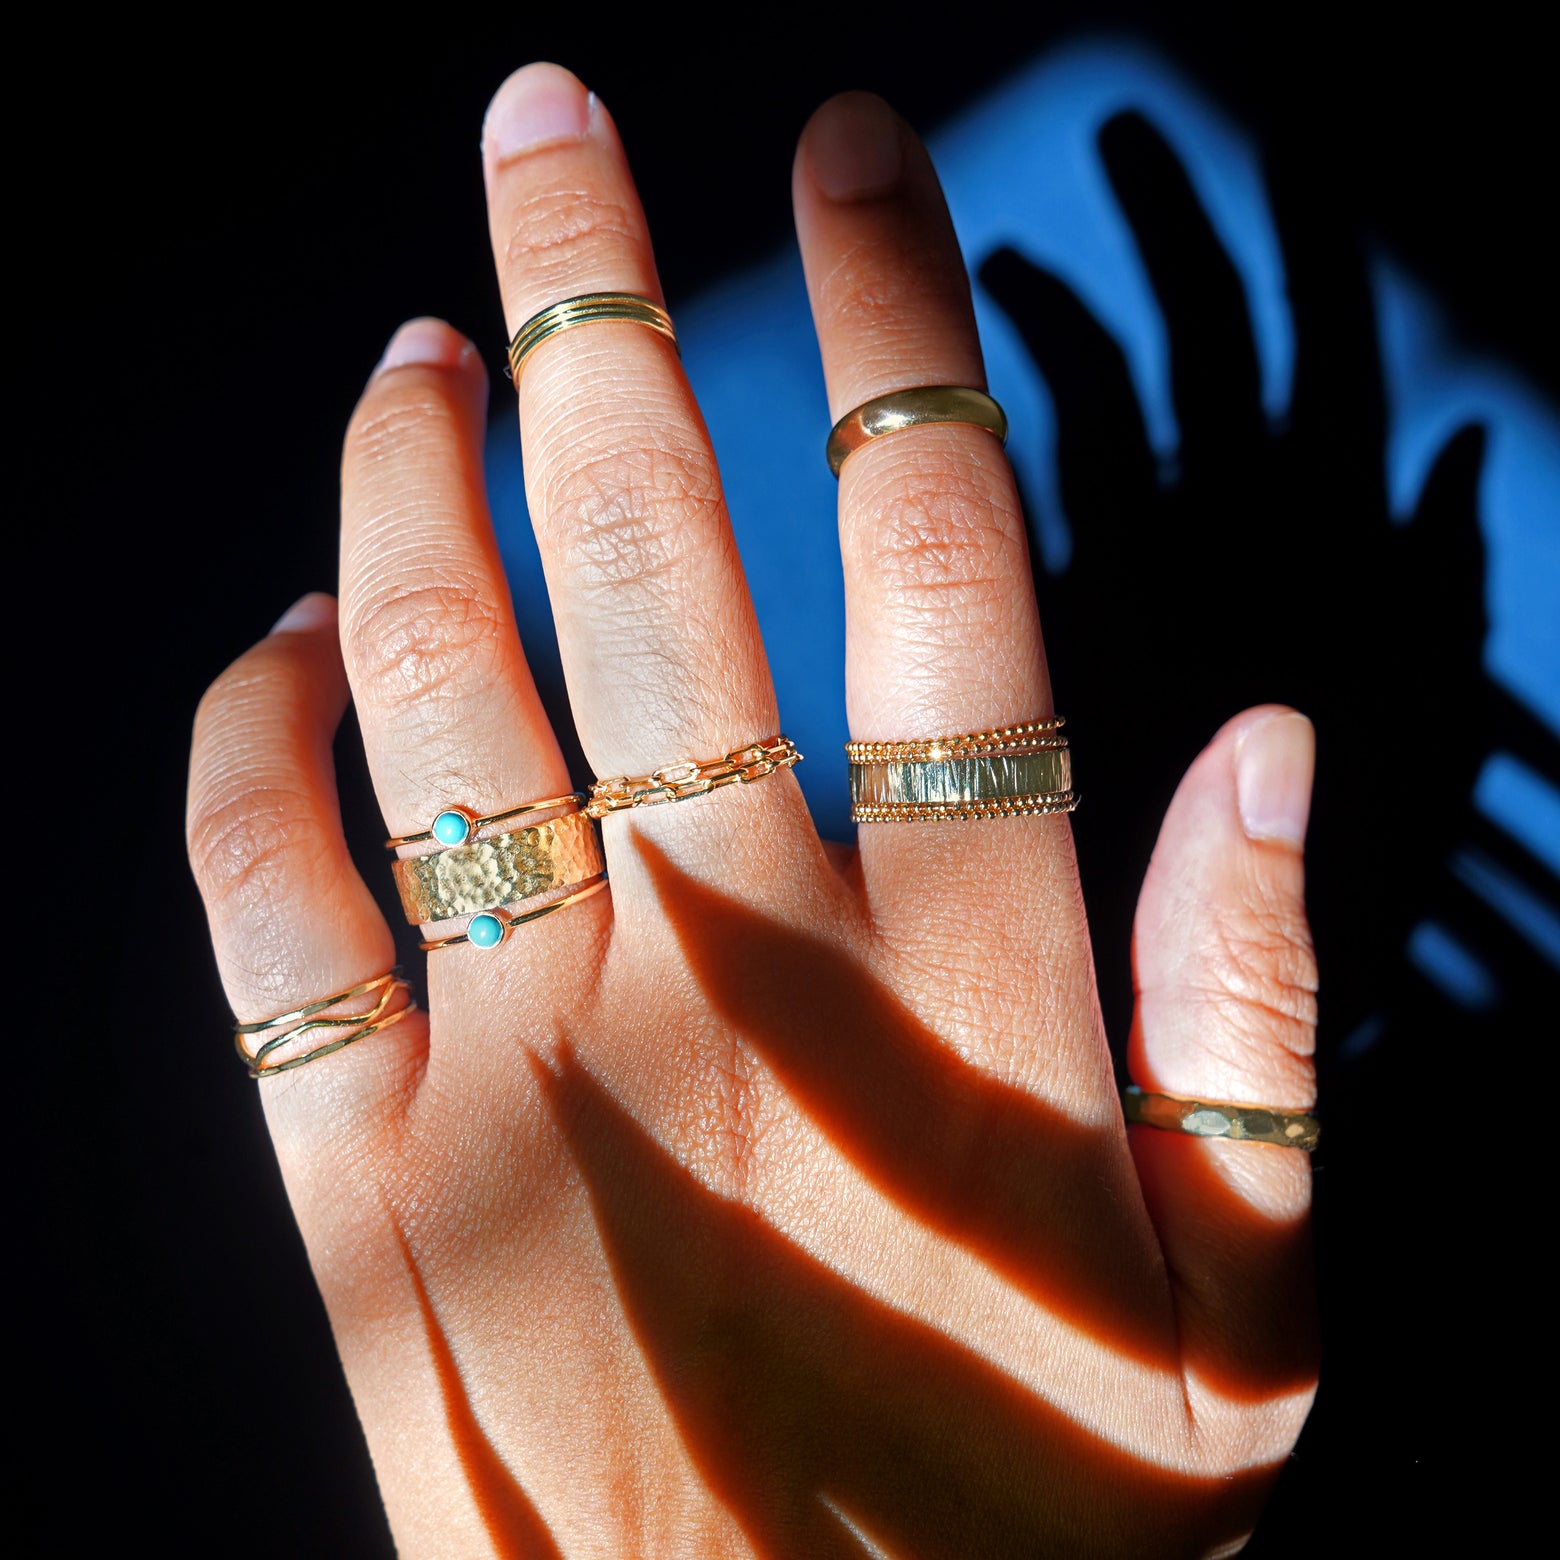 A model's hand lit by a strong light wearing stacks of different Automic Gold rings including two Turquoise Rings 